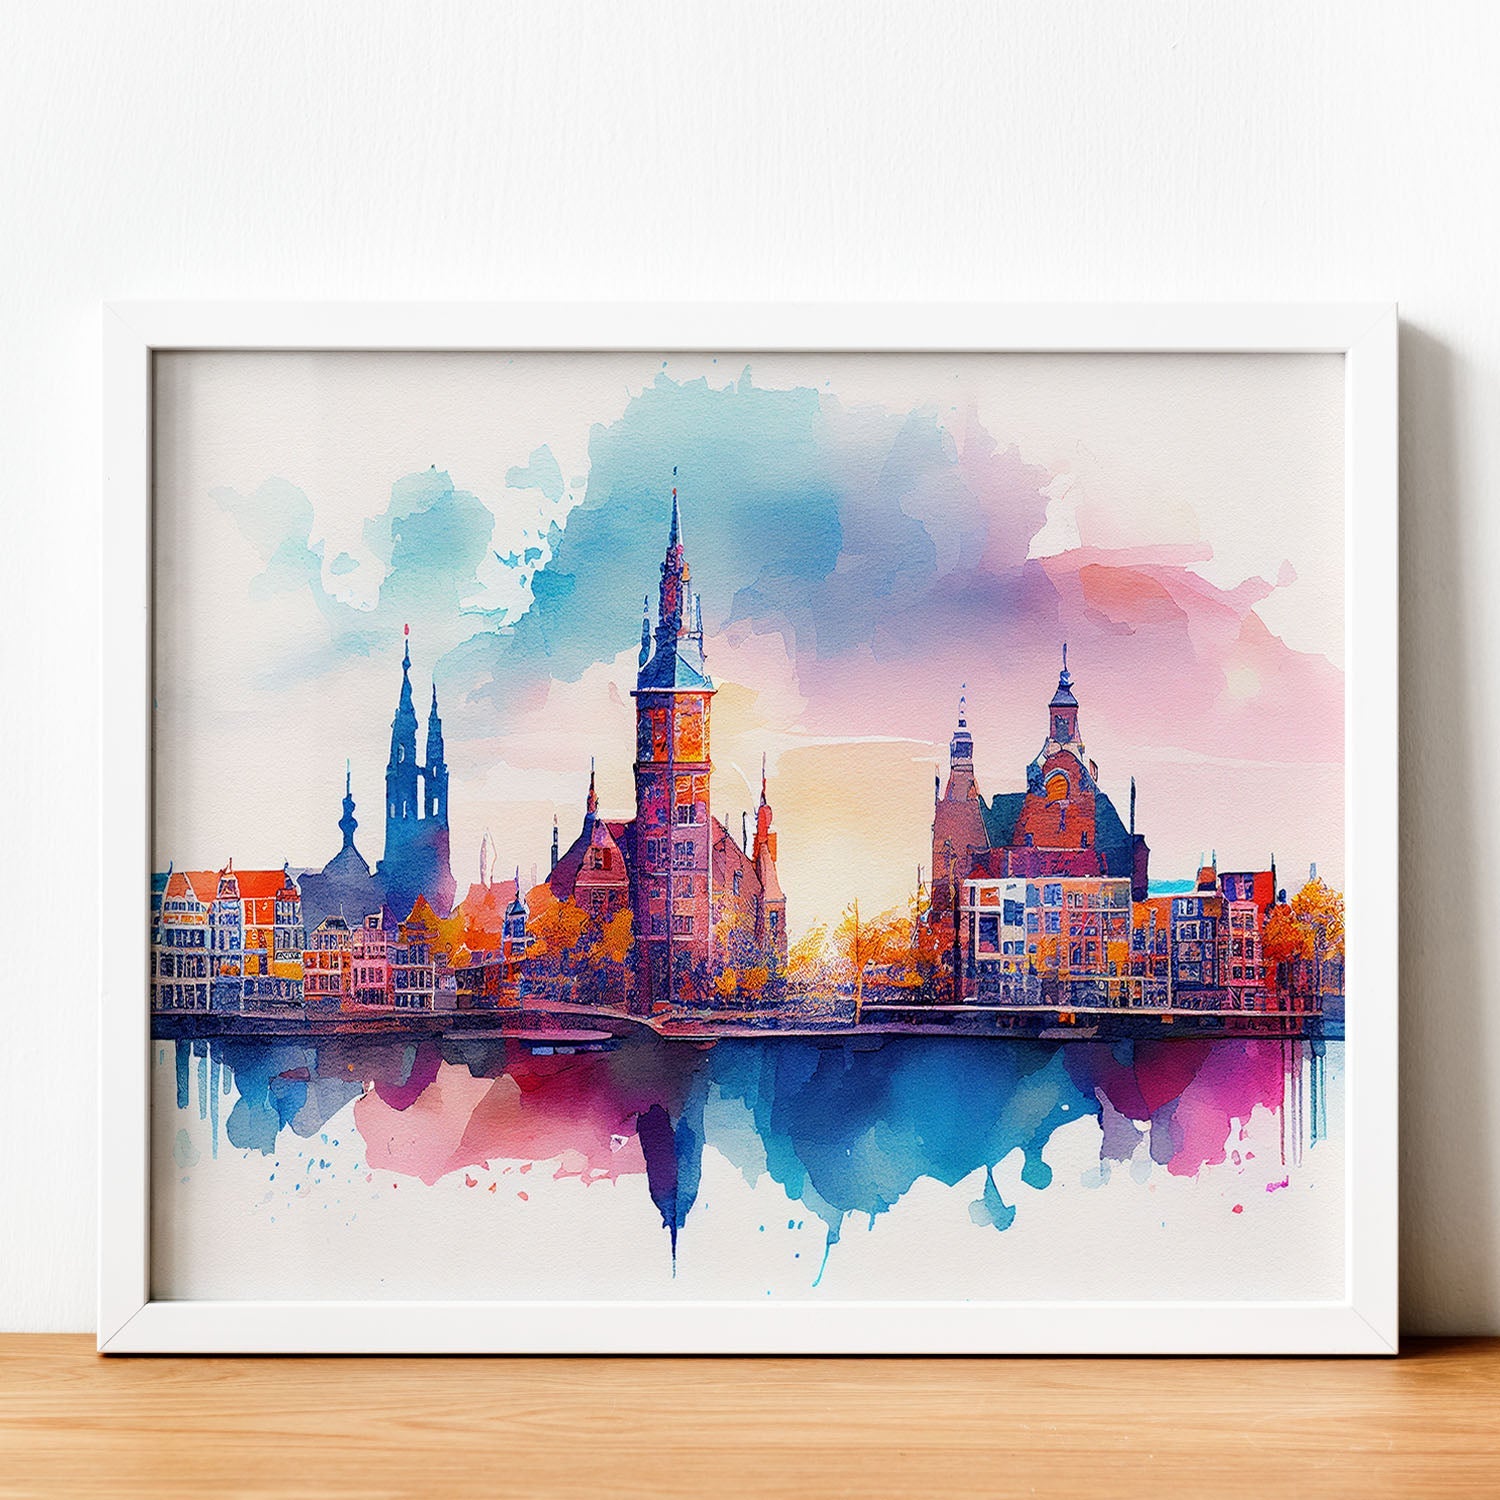 Nacnic watercolor of a skyline of the city of Amsterdam_3. Aesthetic Wall Art Prints for Bedroom or Living Room Design.-Artwork-Nacnic-A4-Sin Marco-Nacnic Estudio SL